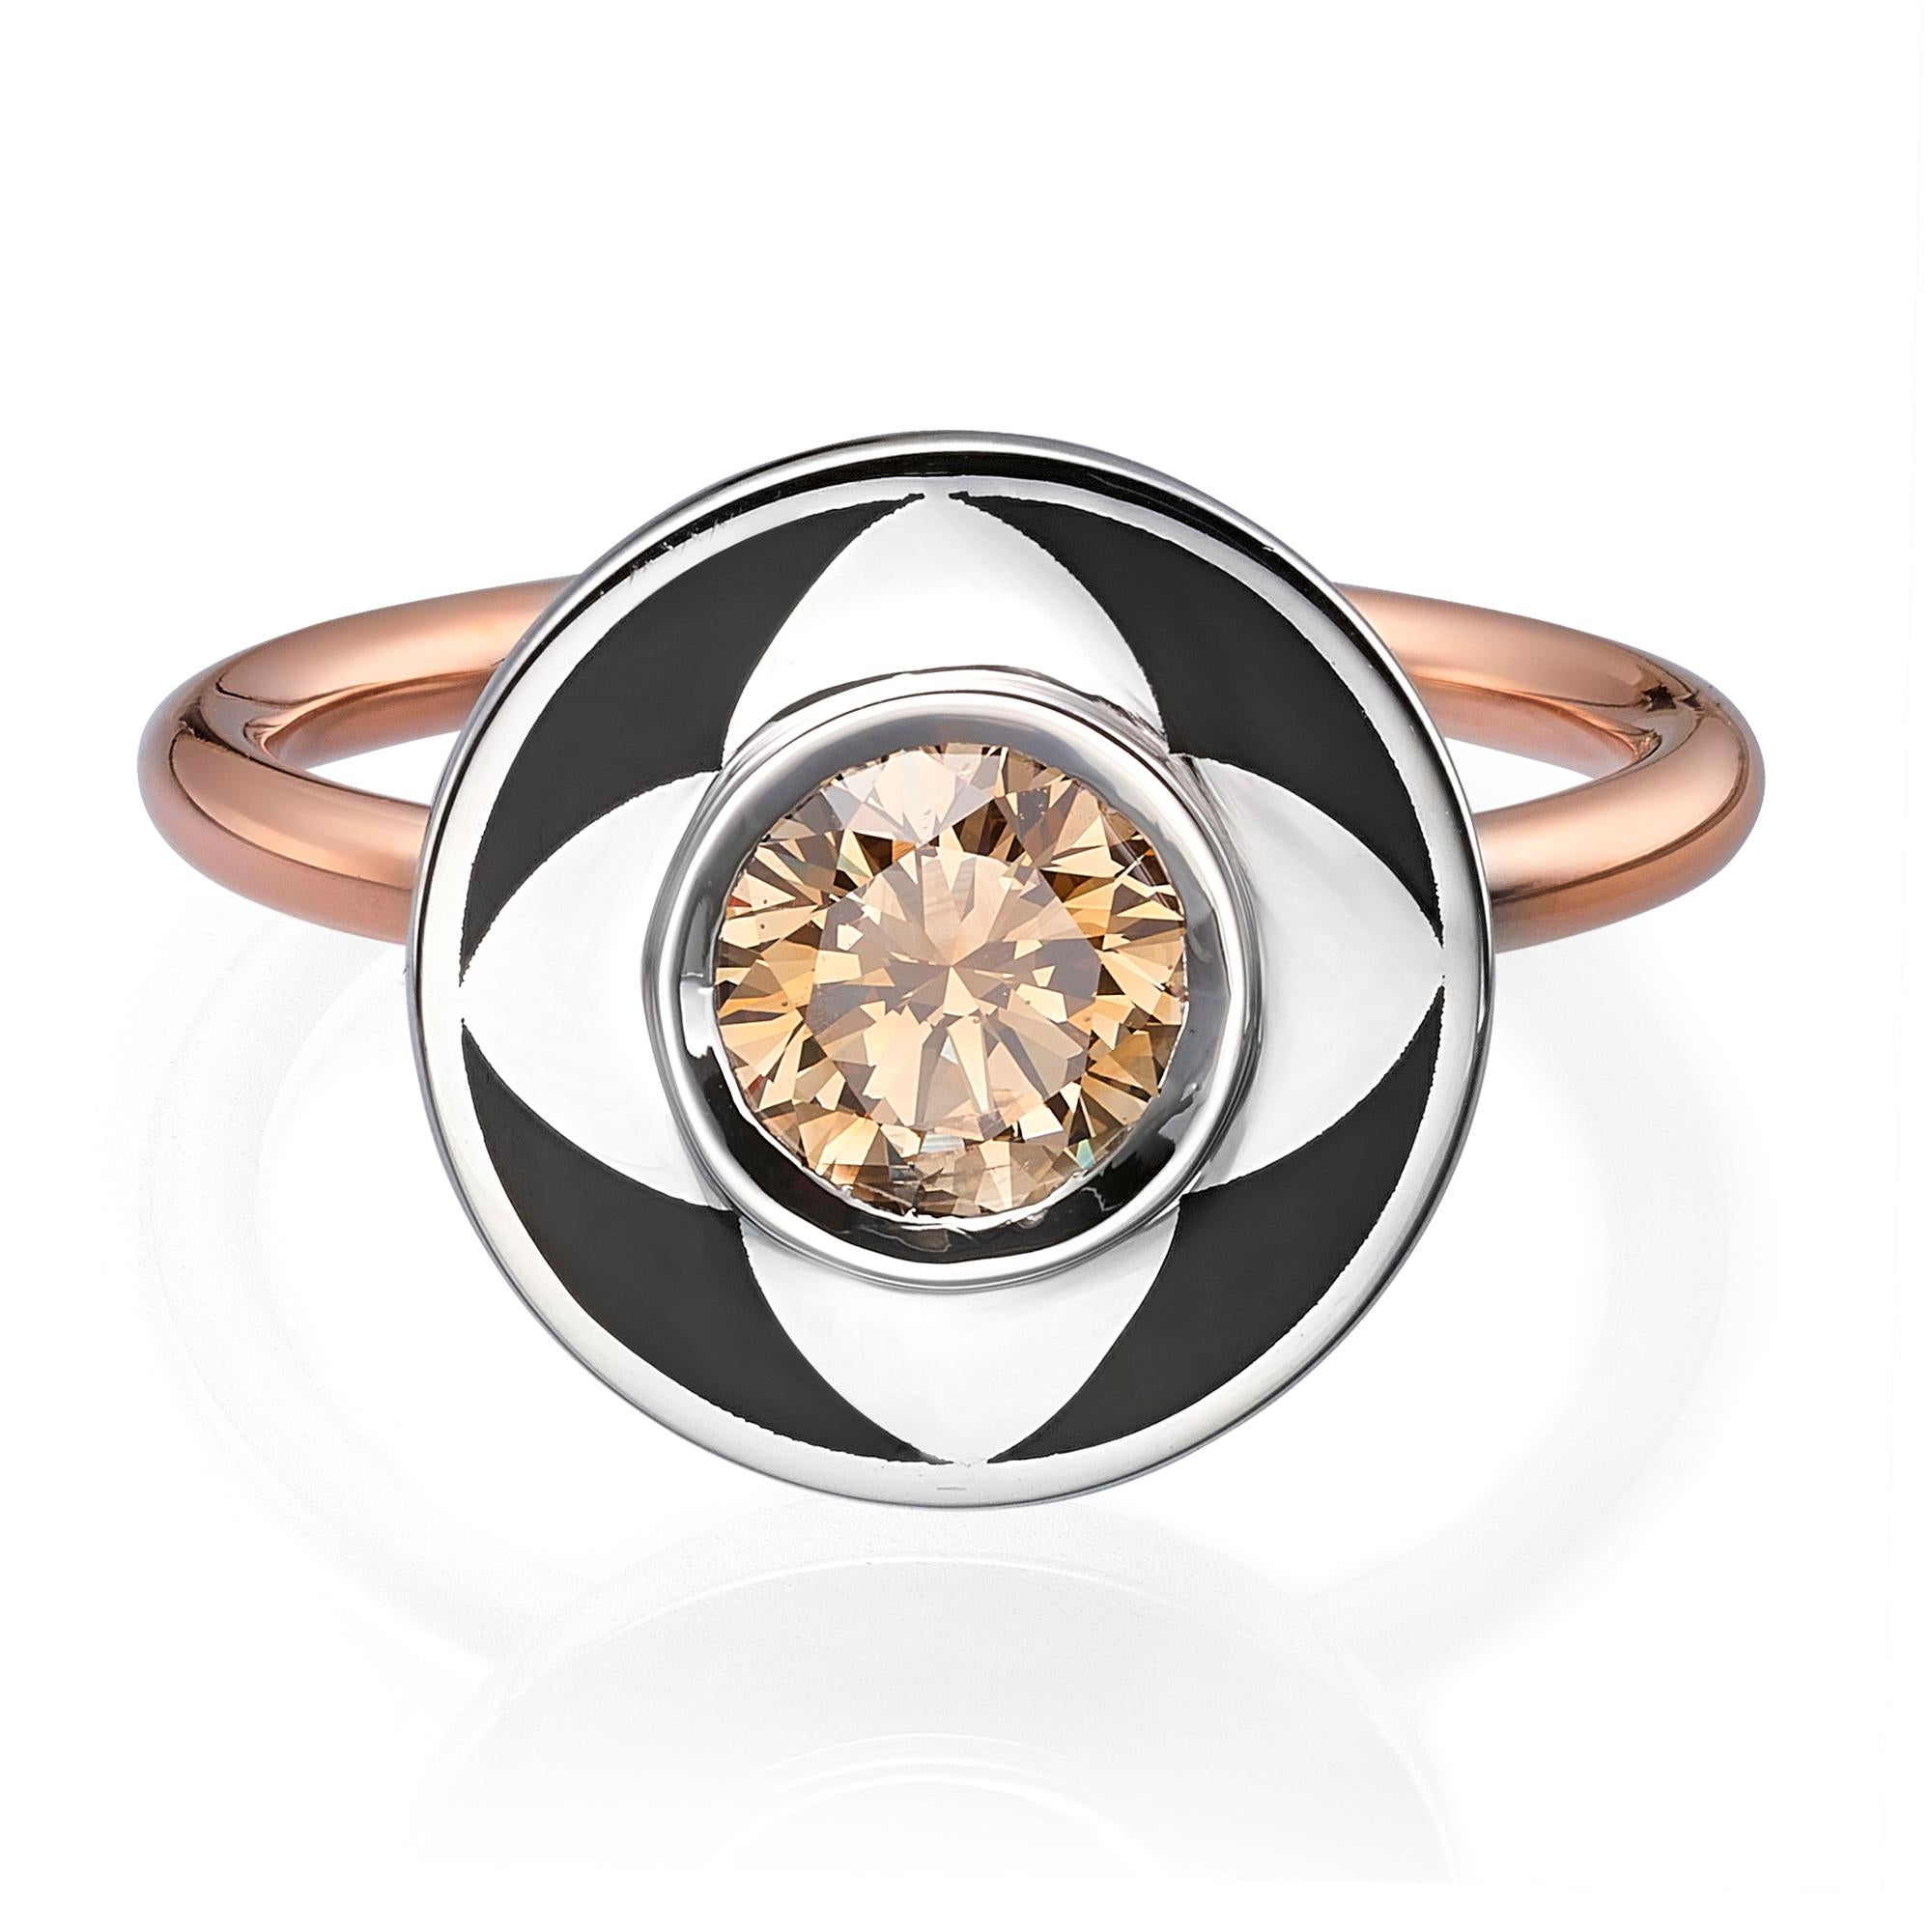 SKU# 4006114

18k white and rose gold diamond ring designed with black enamel. the ring has a bold and striking contrast that draws the eye in. The enamel is expertly applied to create a beautiful flower pattern that adds texture and depth to the